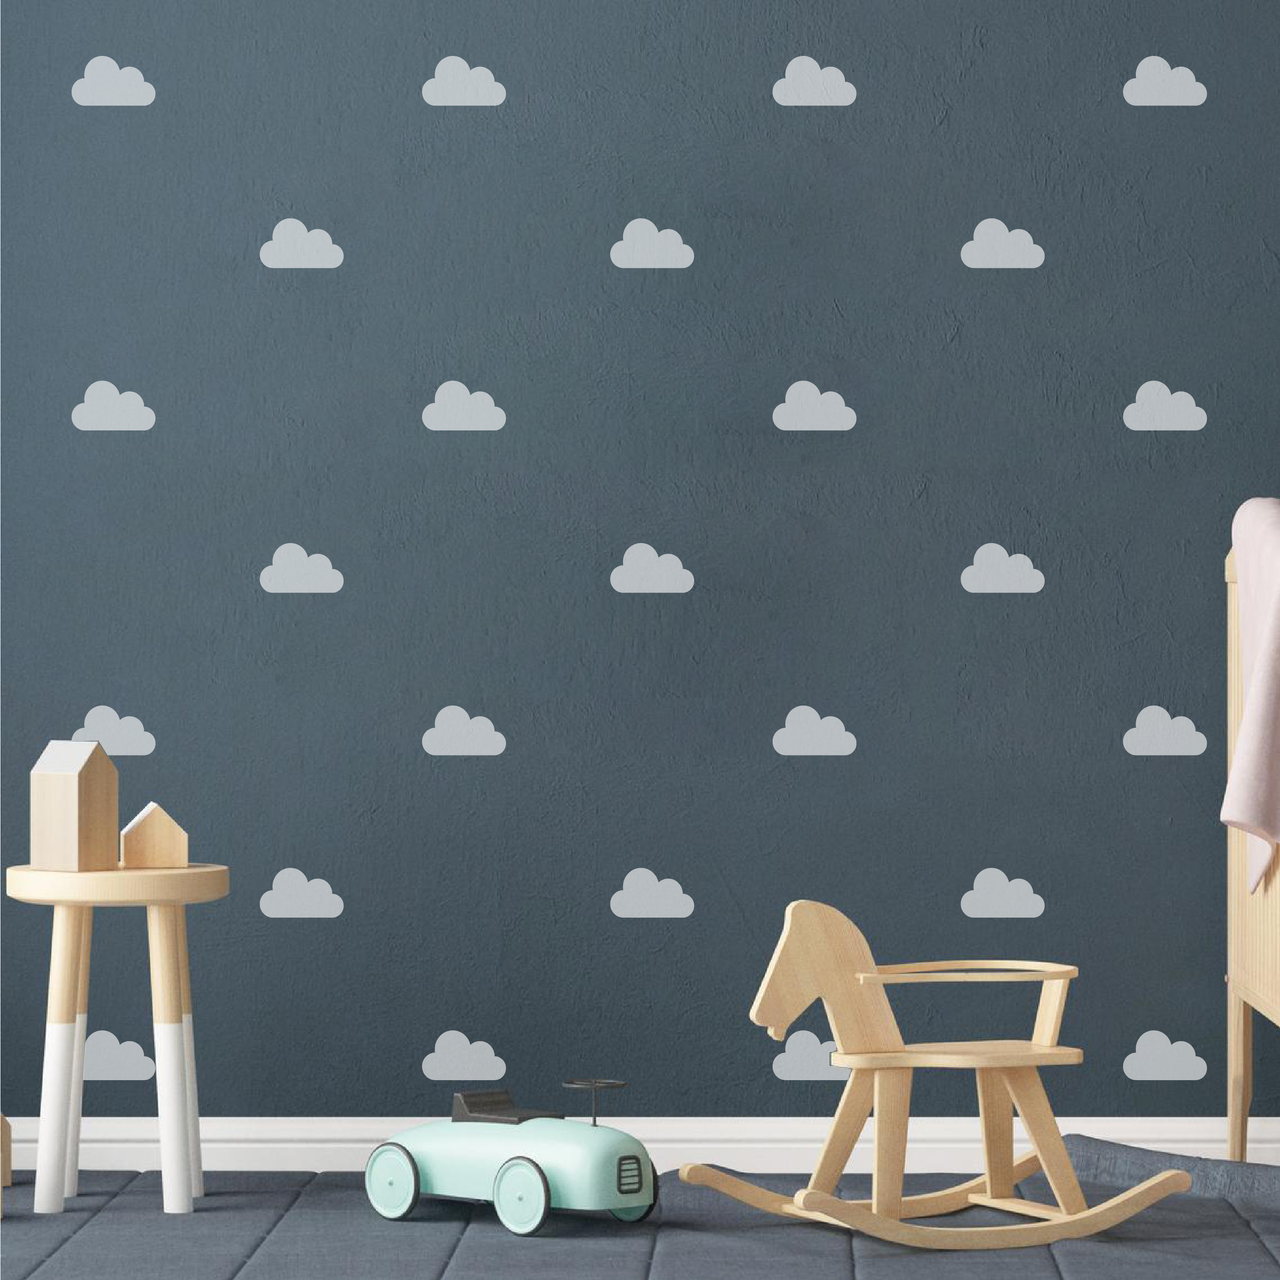 Clouds Wall Decal Set